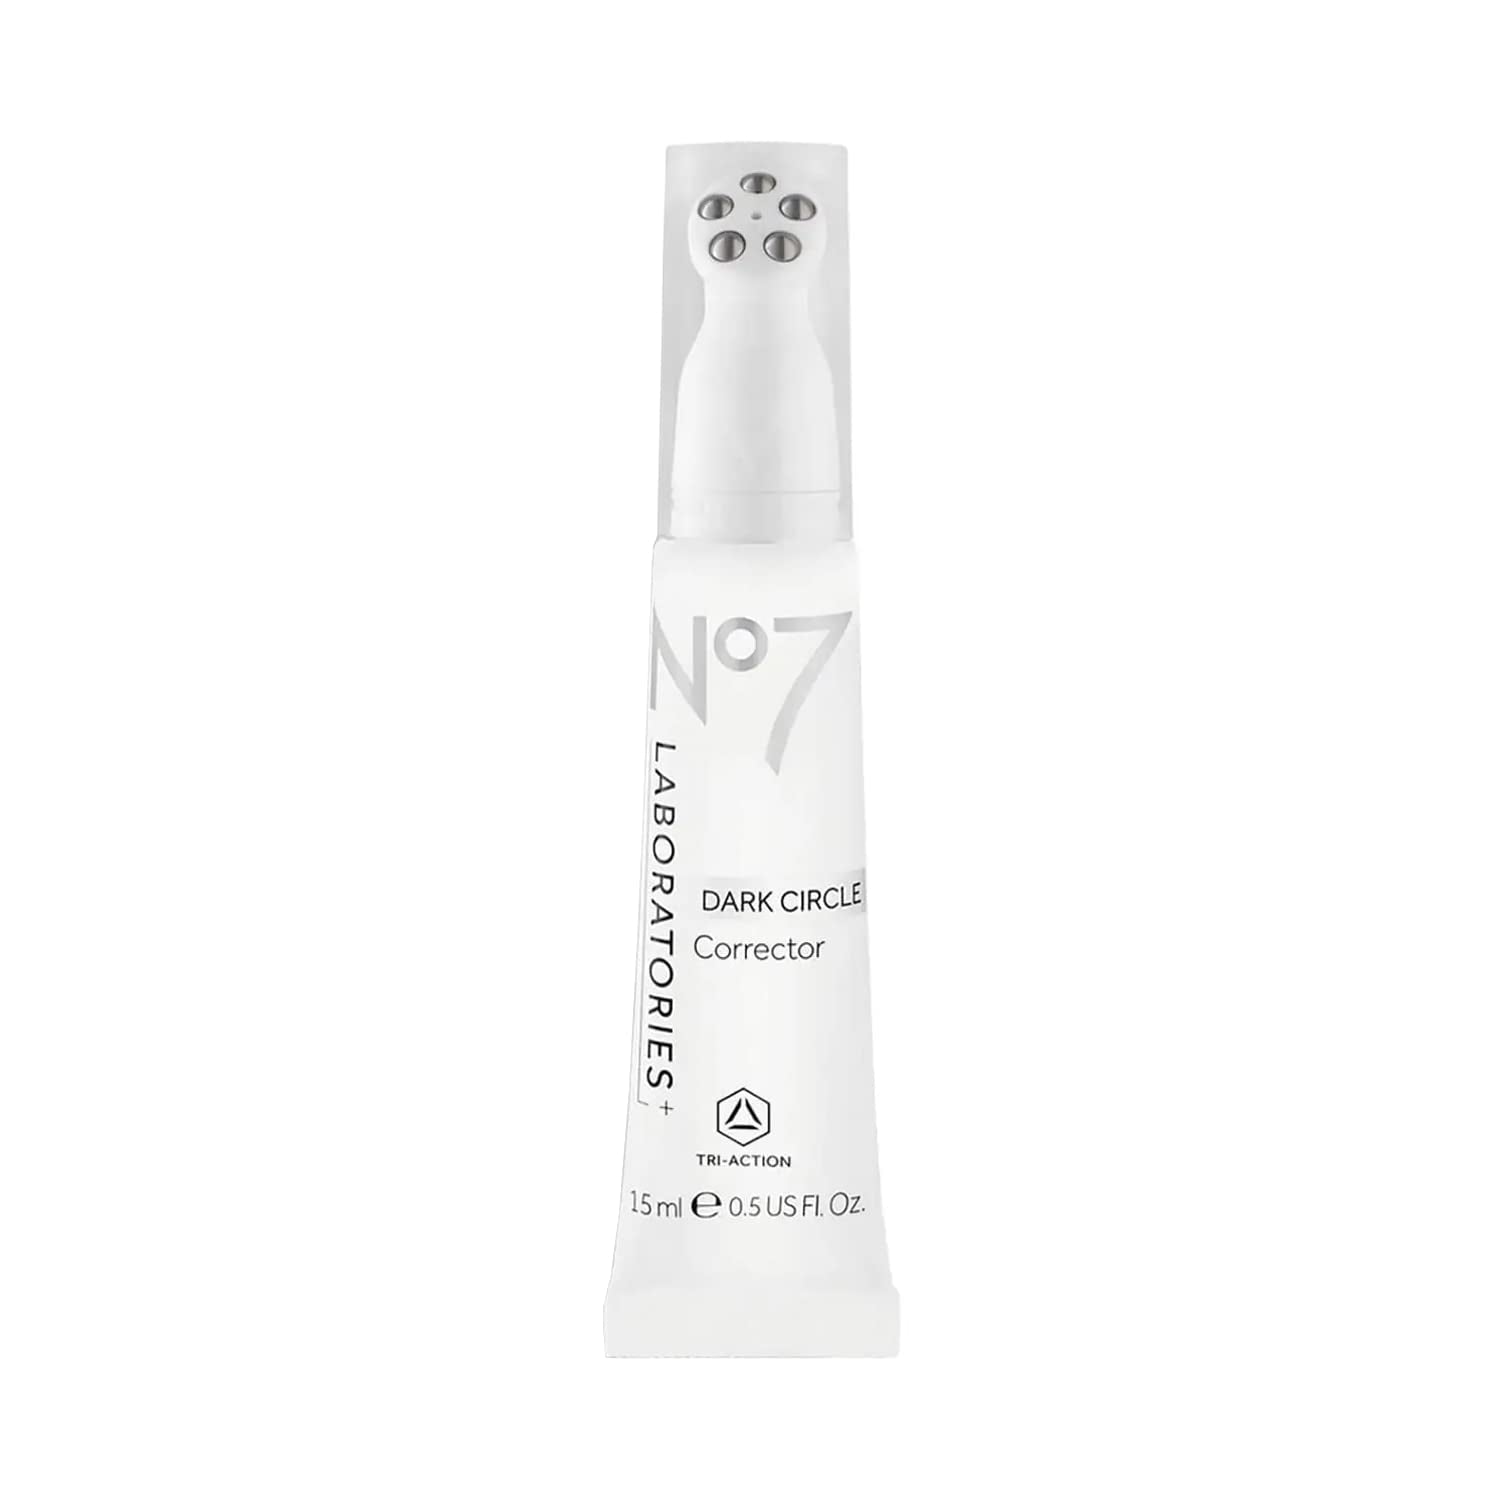 No7 Laboratories Dark Circle Corrector in Light/Medium - Dark Circles Reducer with Cooling Applicator to Reduce Puffy Eyes - Hyaluronic Acid to Plump & Smooth Under Eye Bags (0.5  )